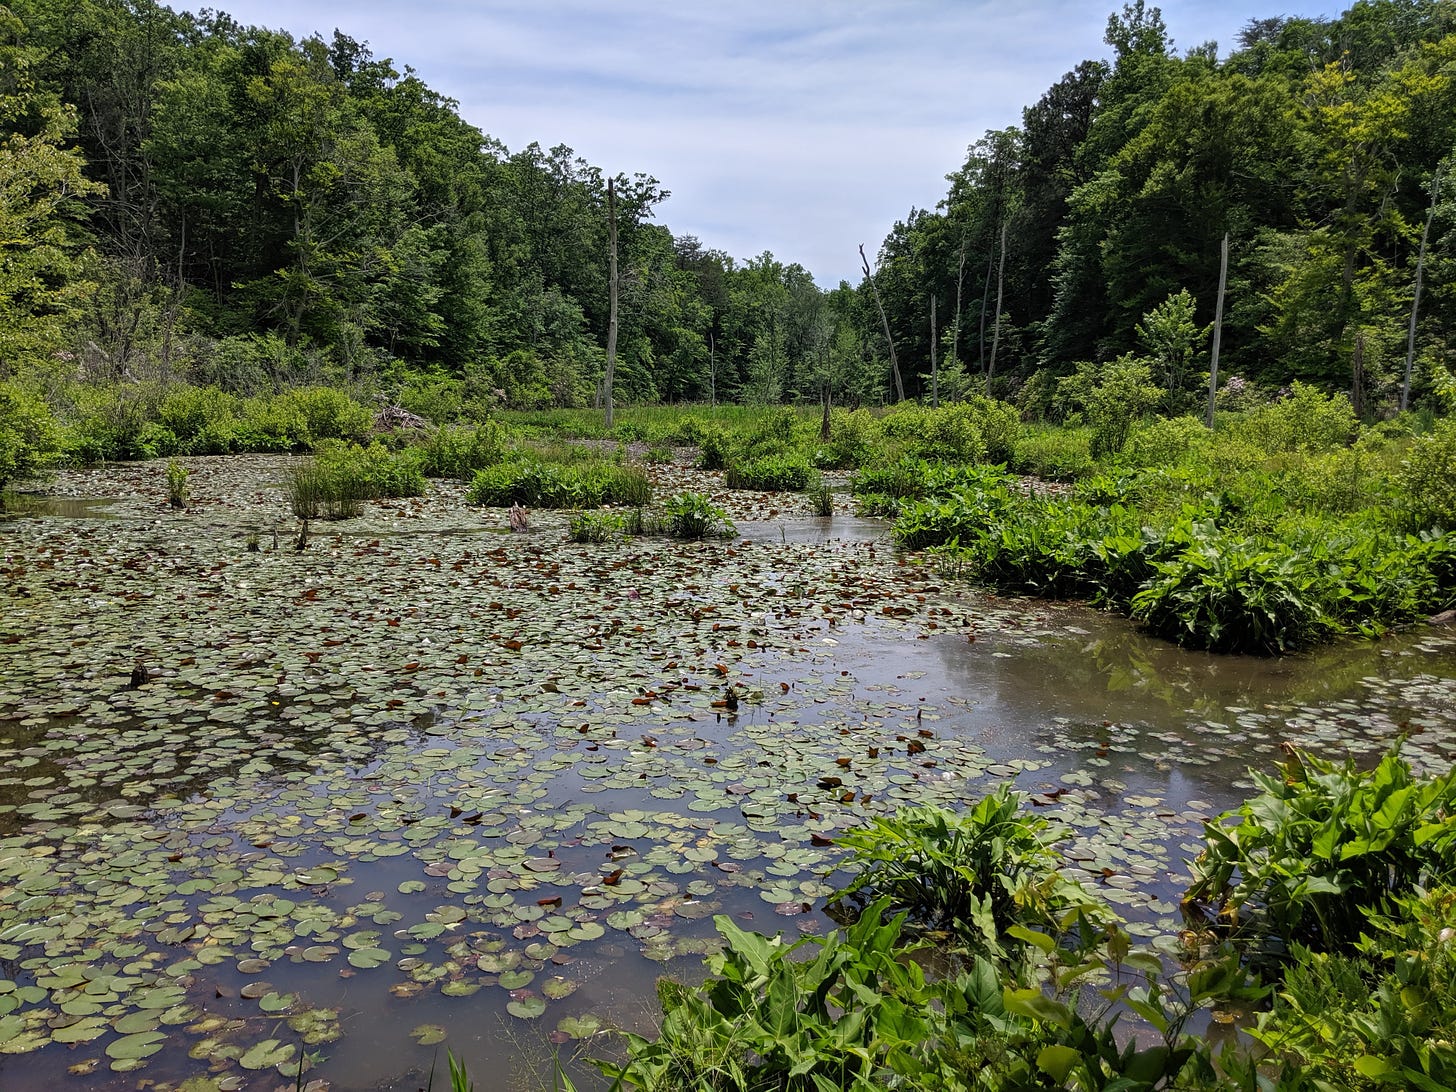 Green deciduous trees line a boggy area in Maryland, the lake-like area covered in water lilies and tall water grasses.